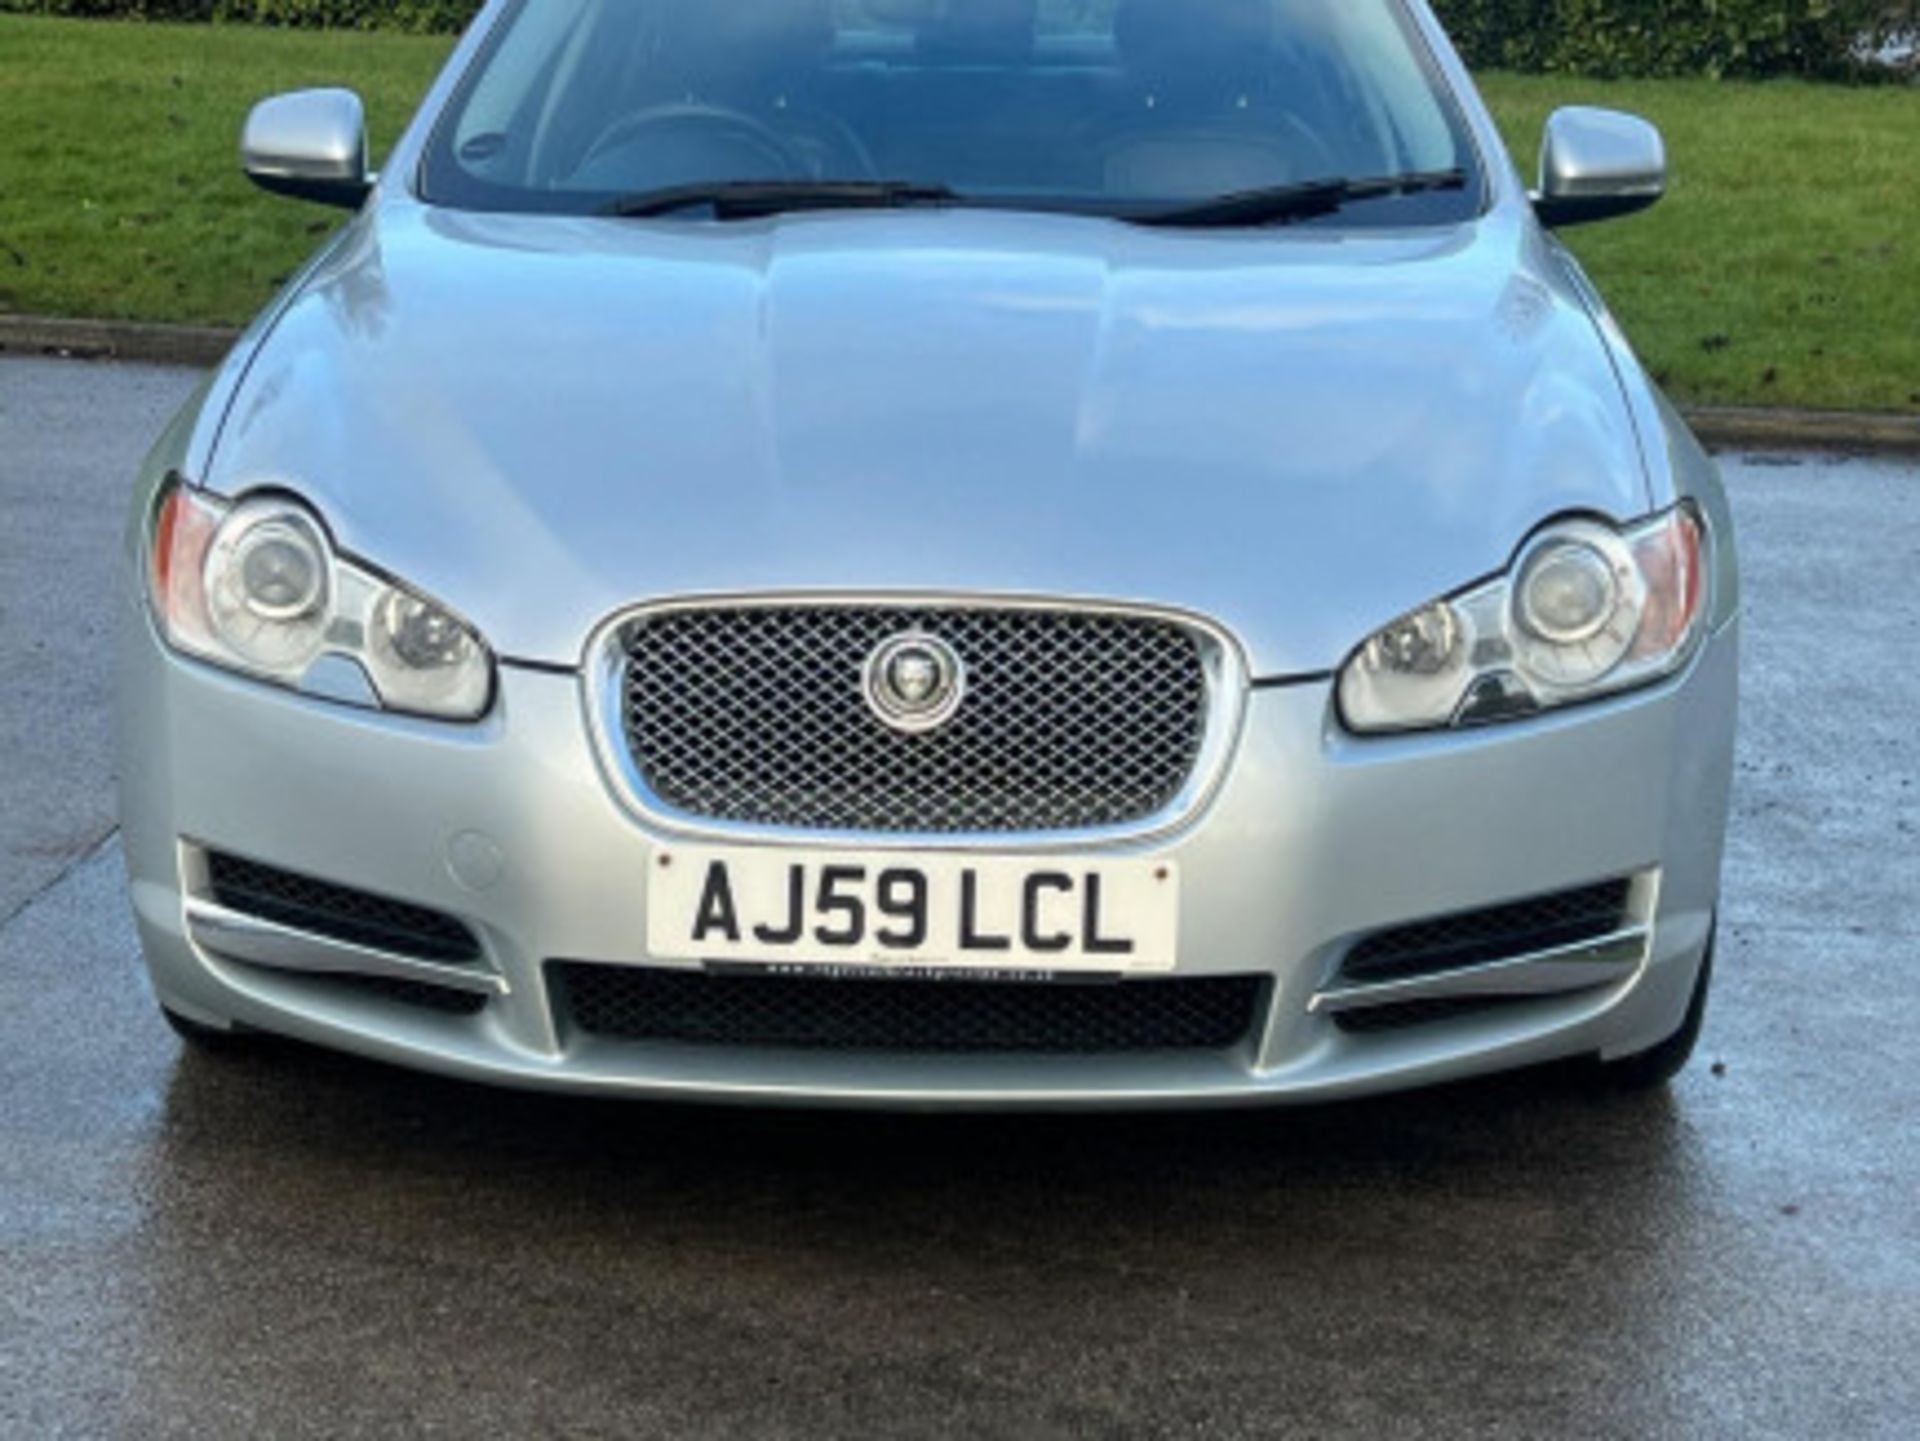 LUXURIOUS JAGUAR XF 3.0D V6 LUXURY 4DR AUTOMATIC SALOON >>--NO VAT ON HAMMER--<< - Image 37 of 80